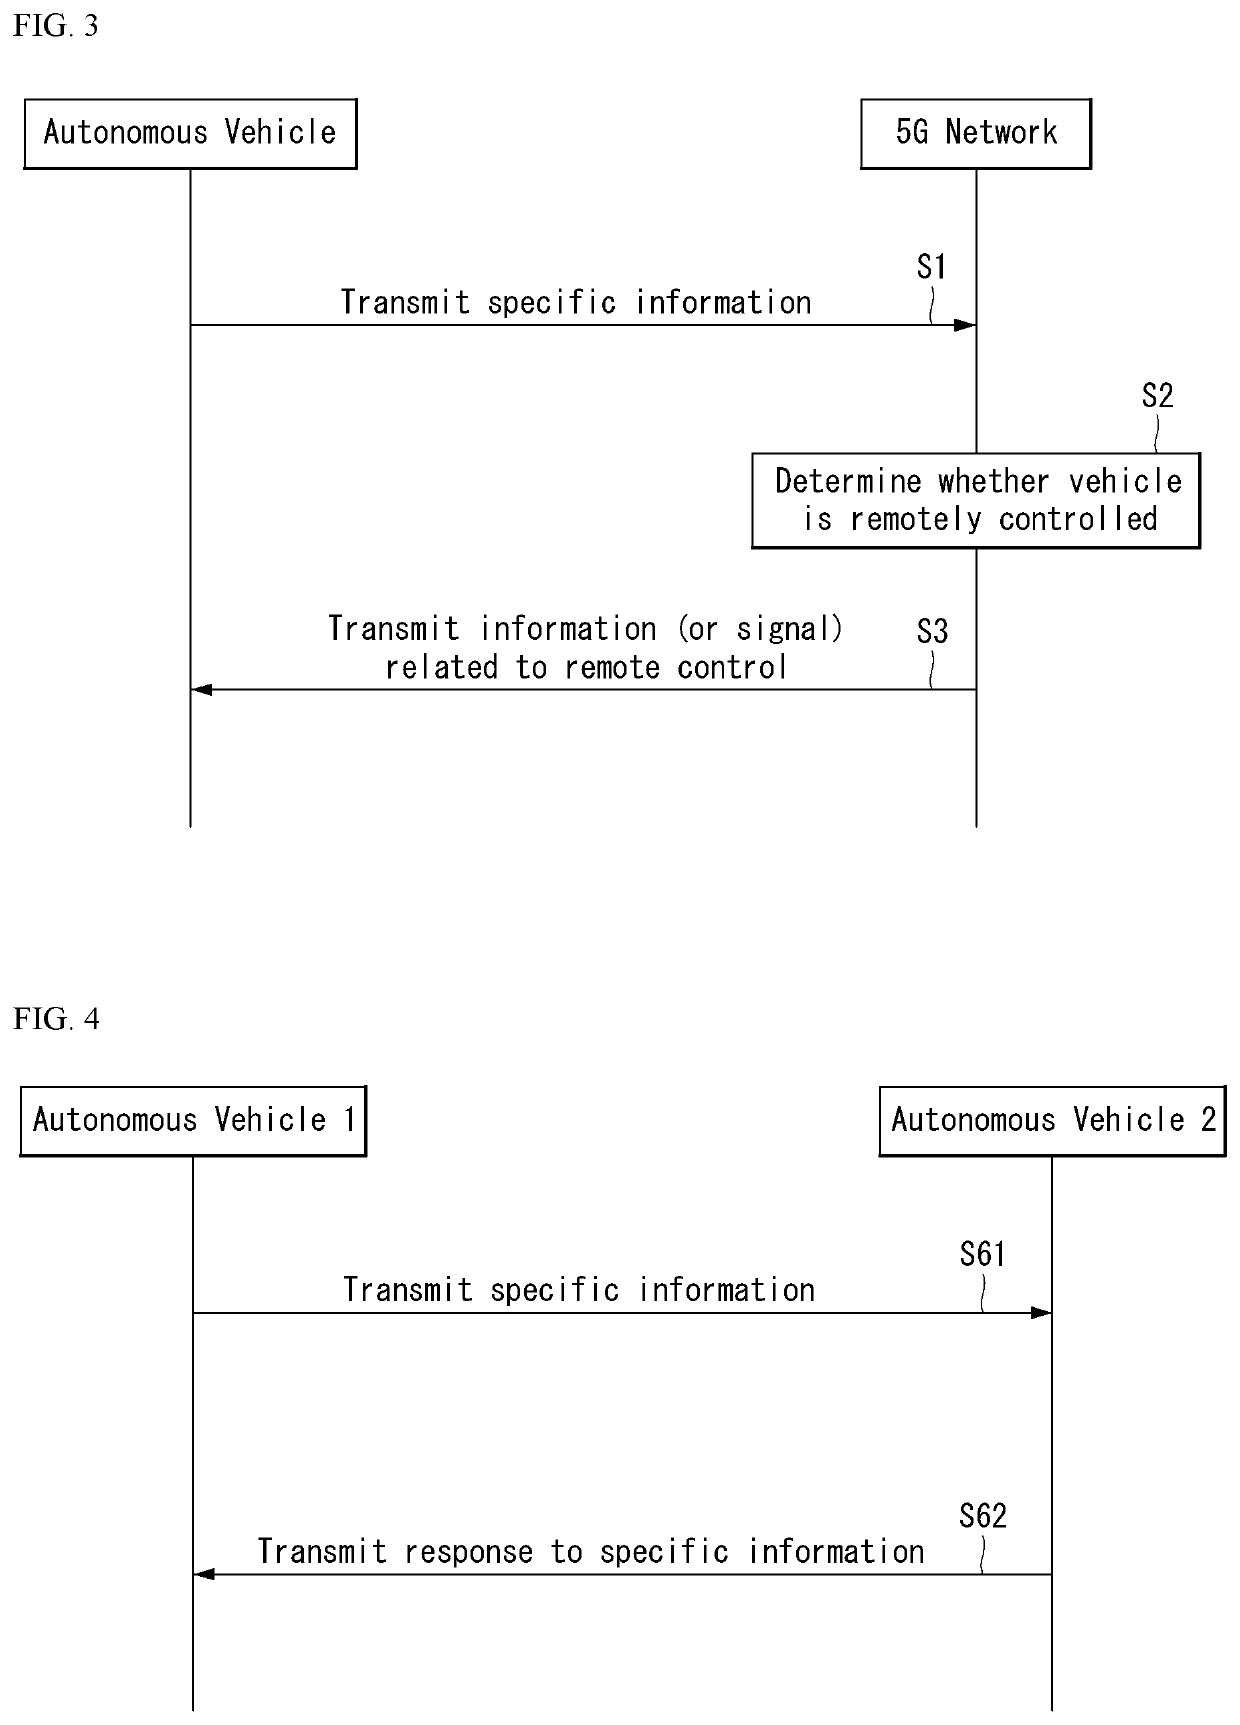 Method and apparatus for responding to hacking on autonomous vehicle